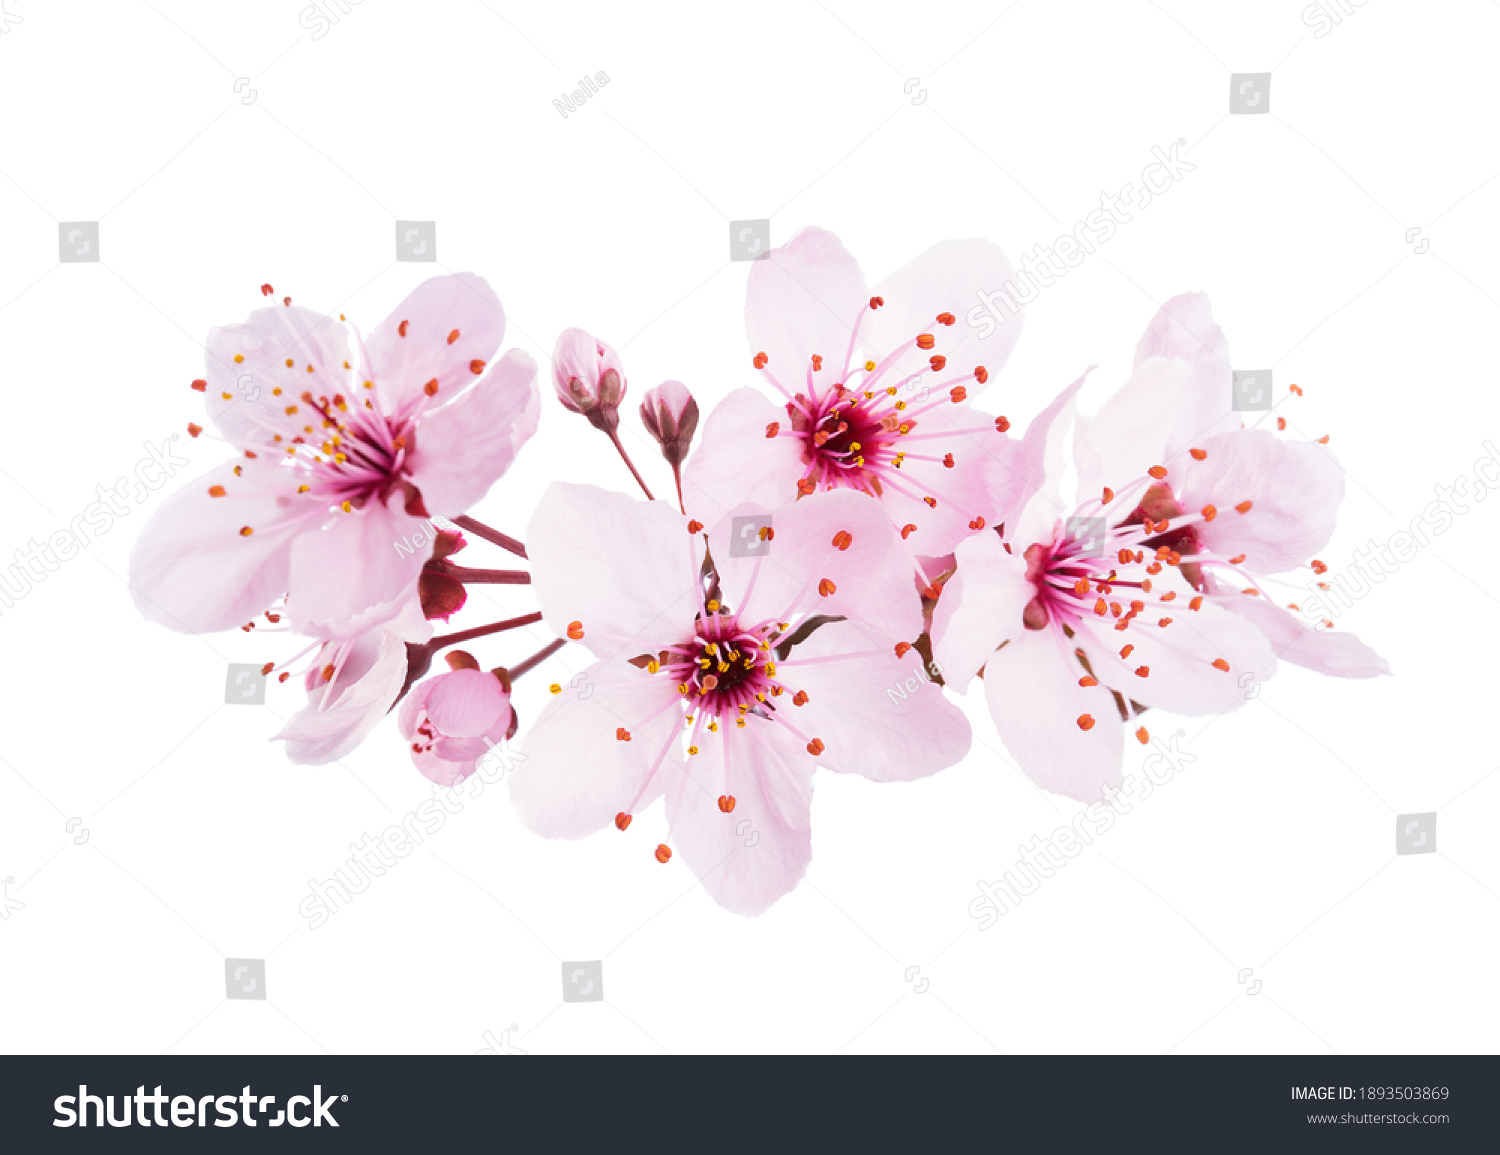 Up-close light pink Cherry blossoms ( Sakura) isolated on a white background. #1893503869